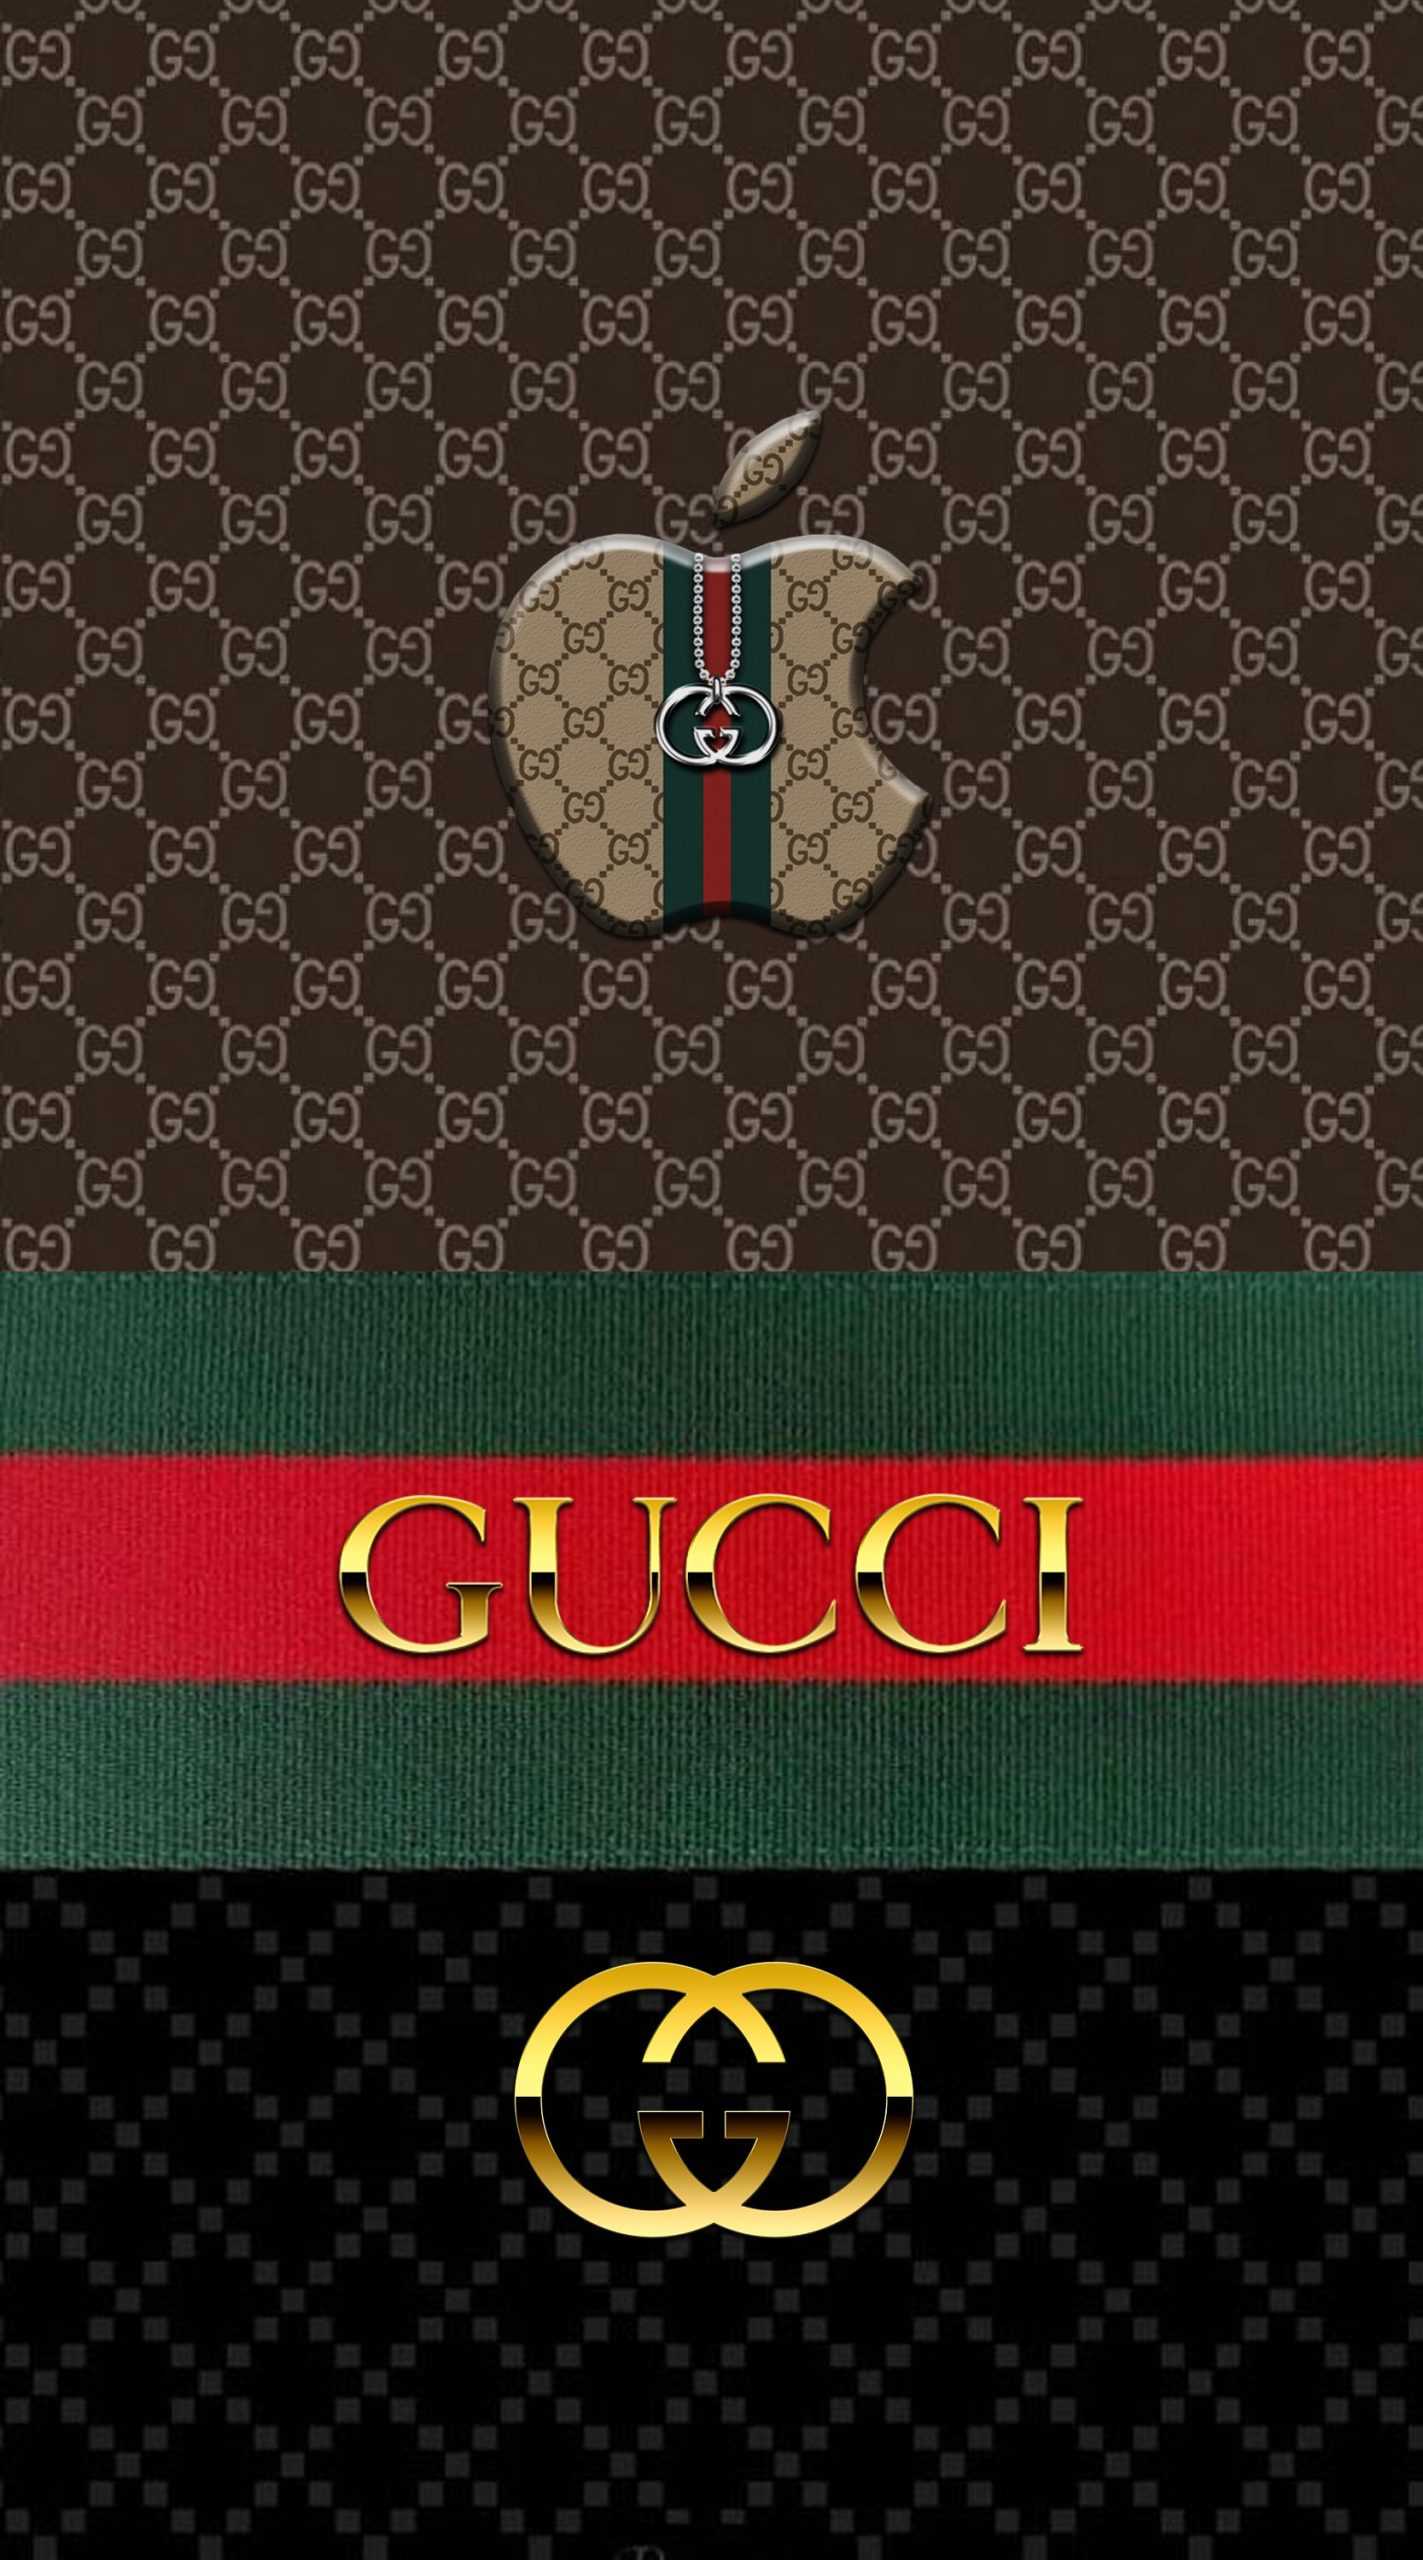 Gucci Wallpaper Discover more Apple, Background, Iphone, Louis Vuitton,  Supreme wallpapers. …